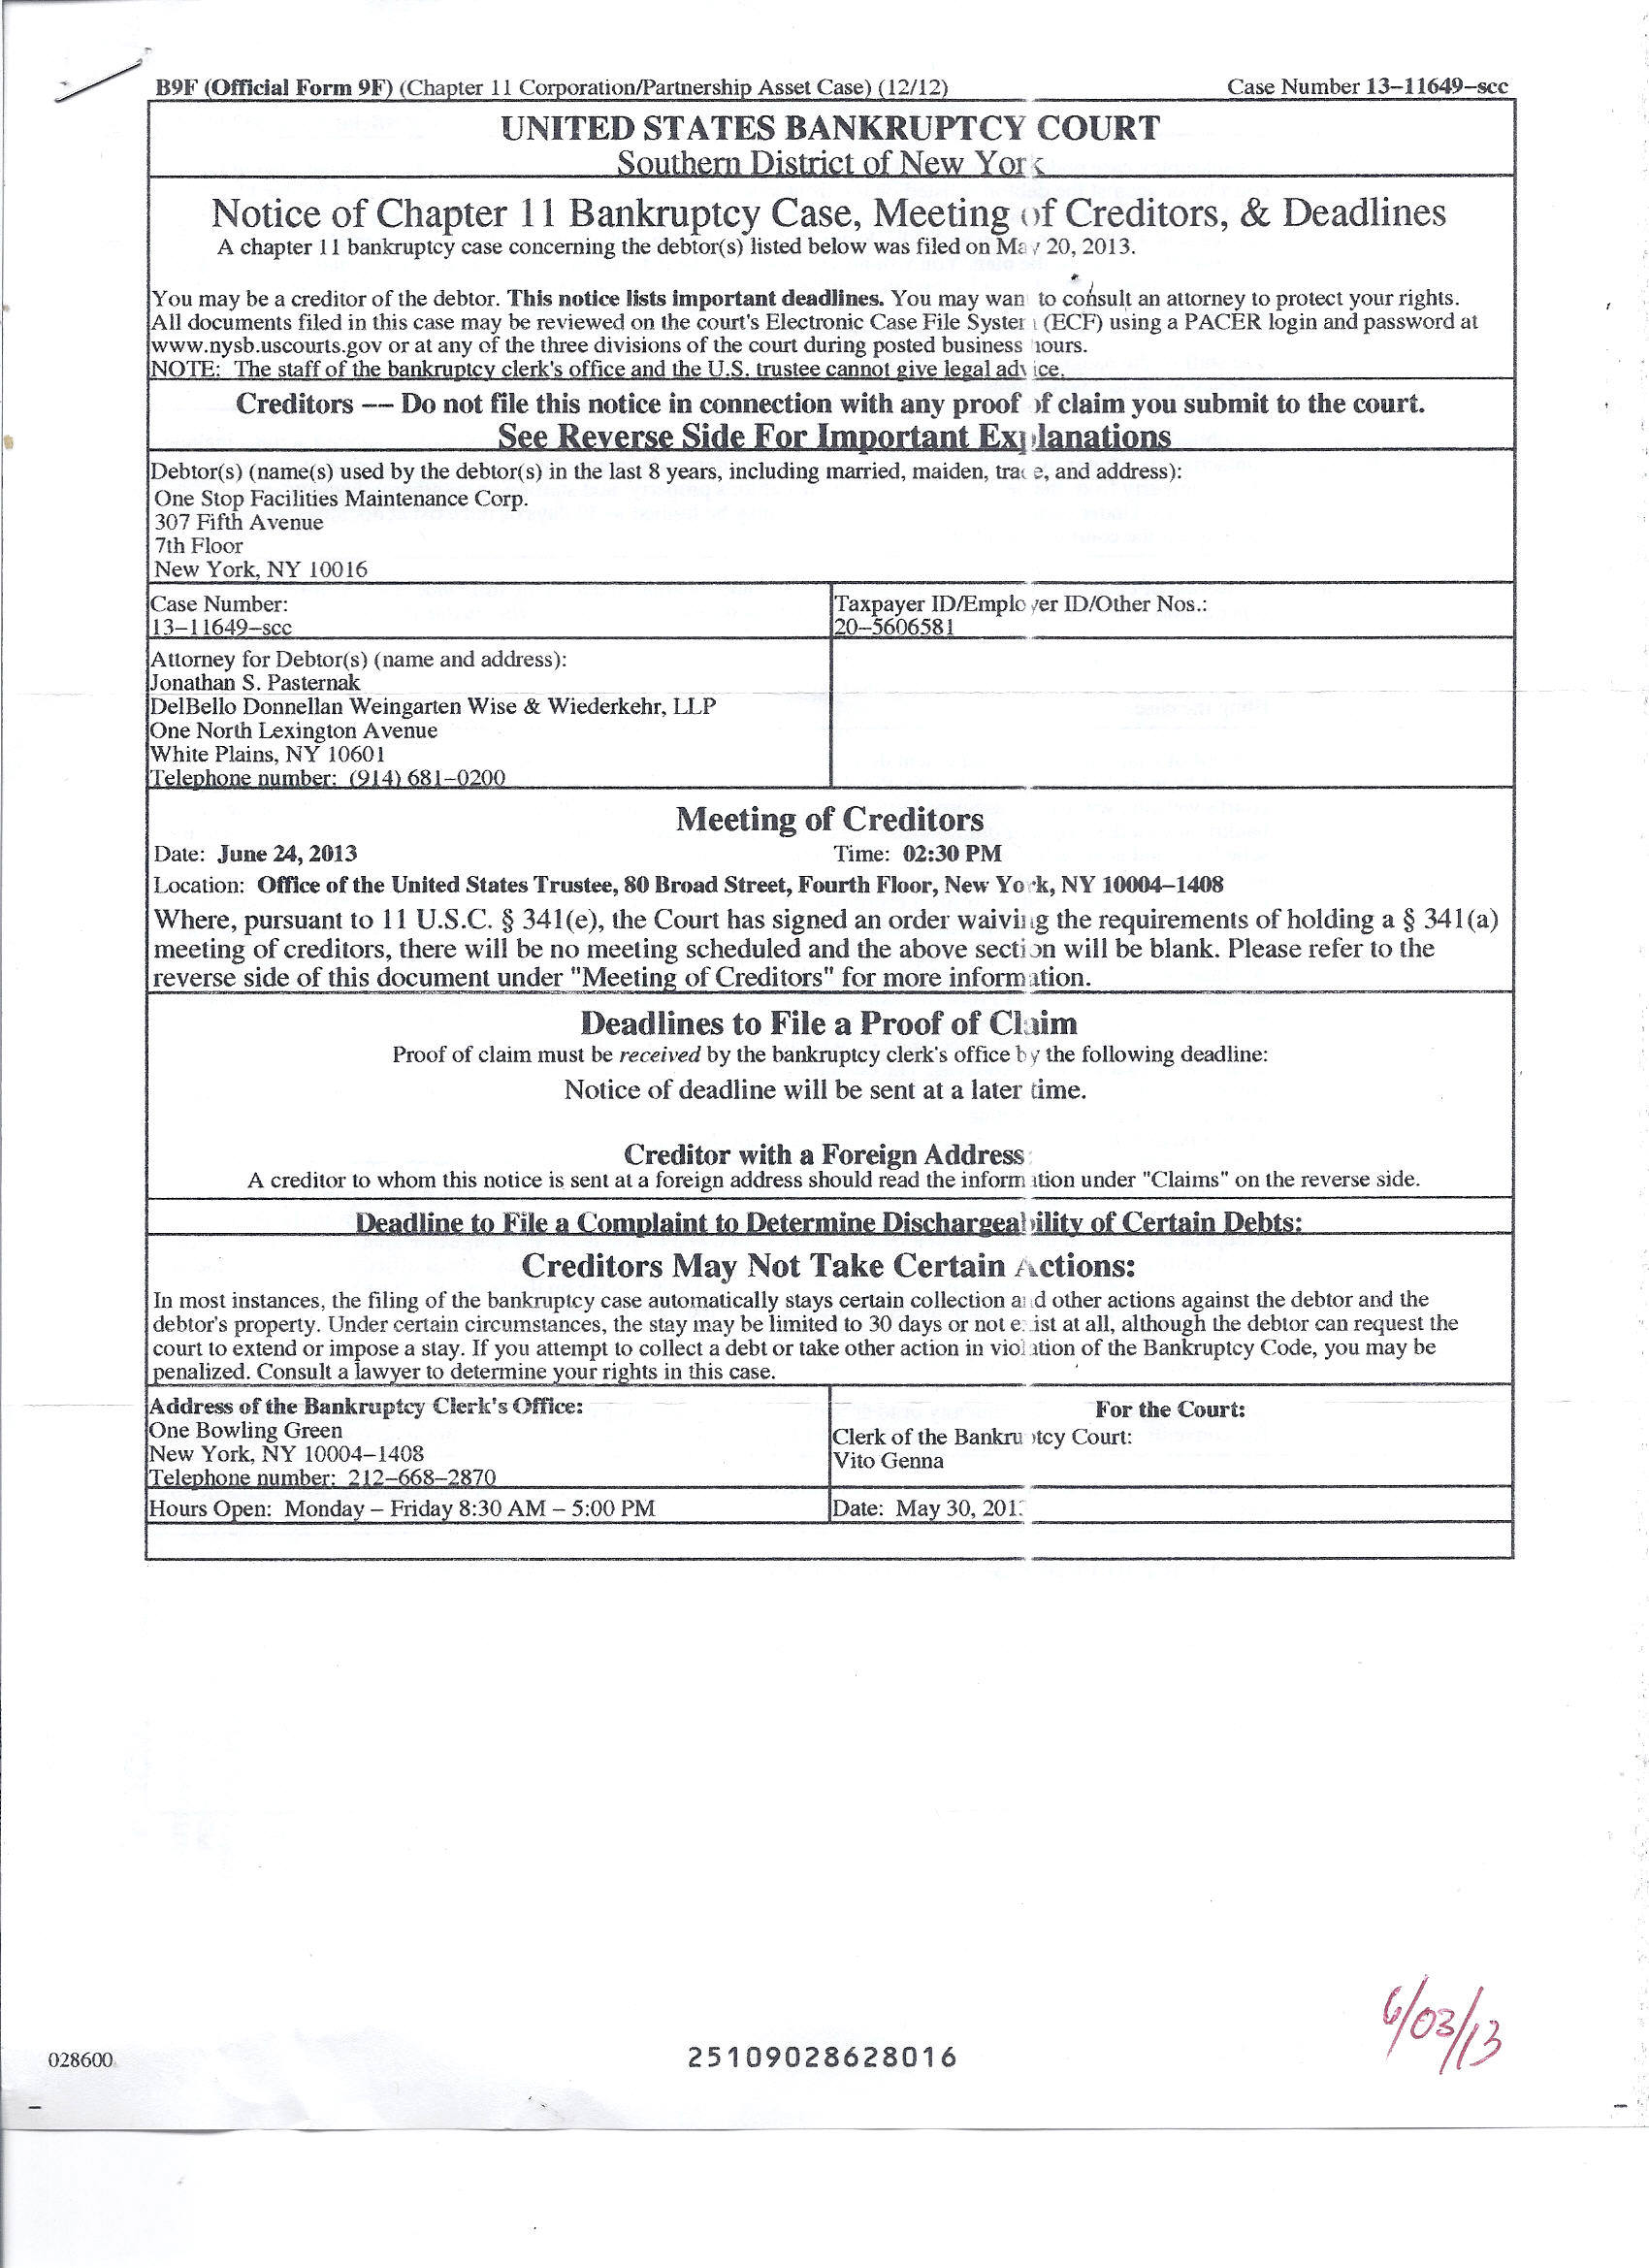 Notice of Chapter 11 Bankruptcy Case